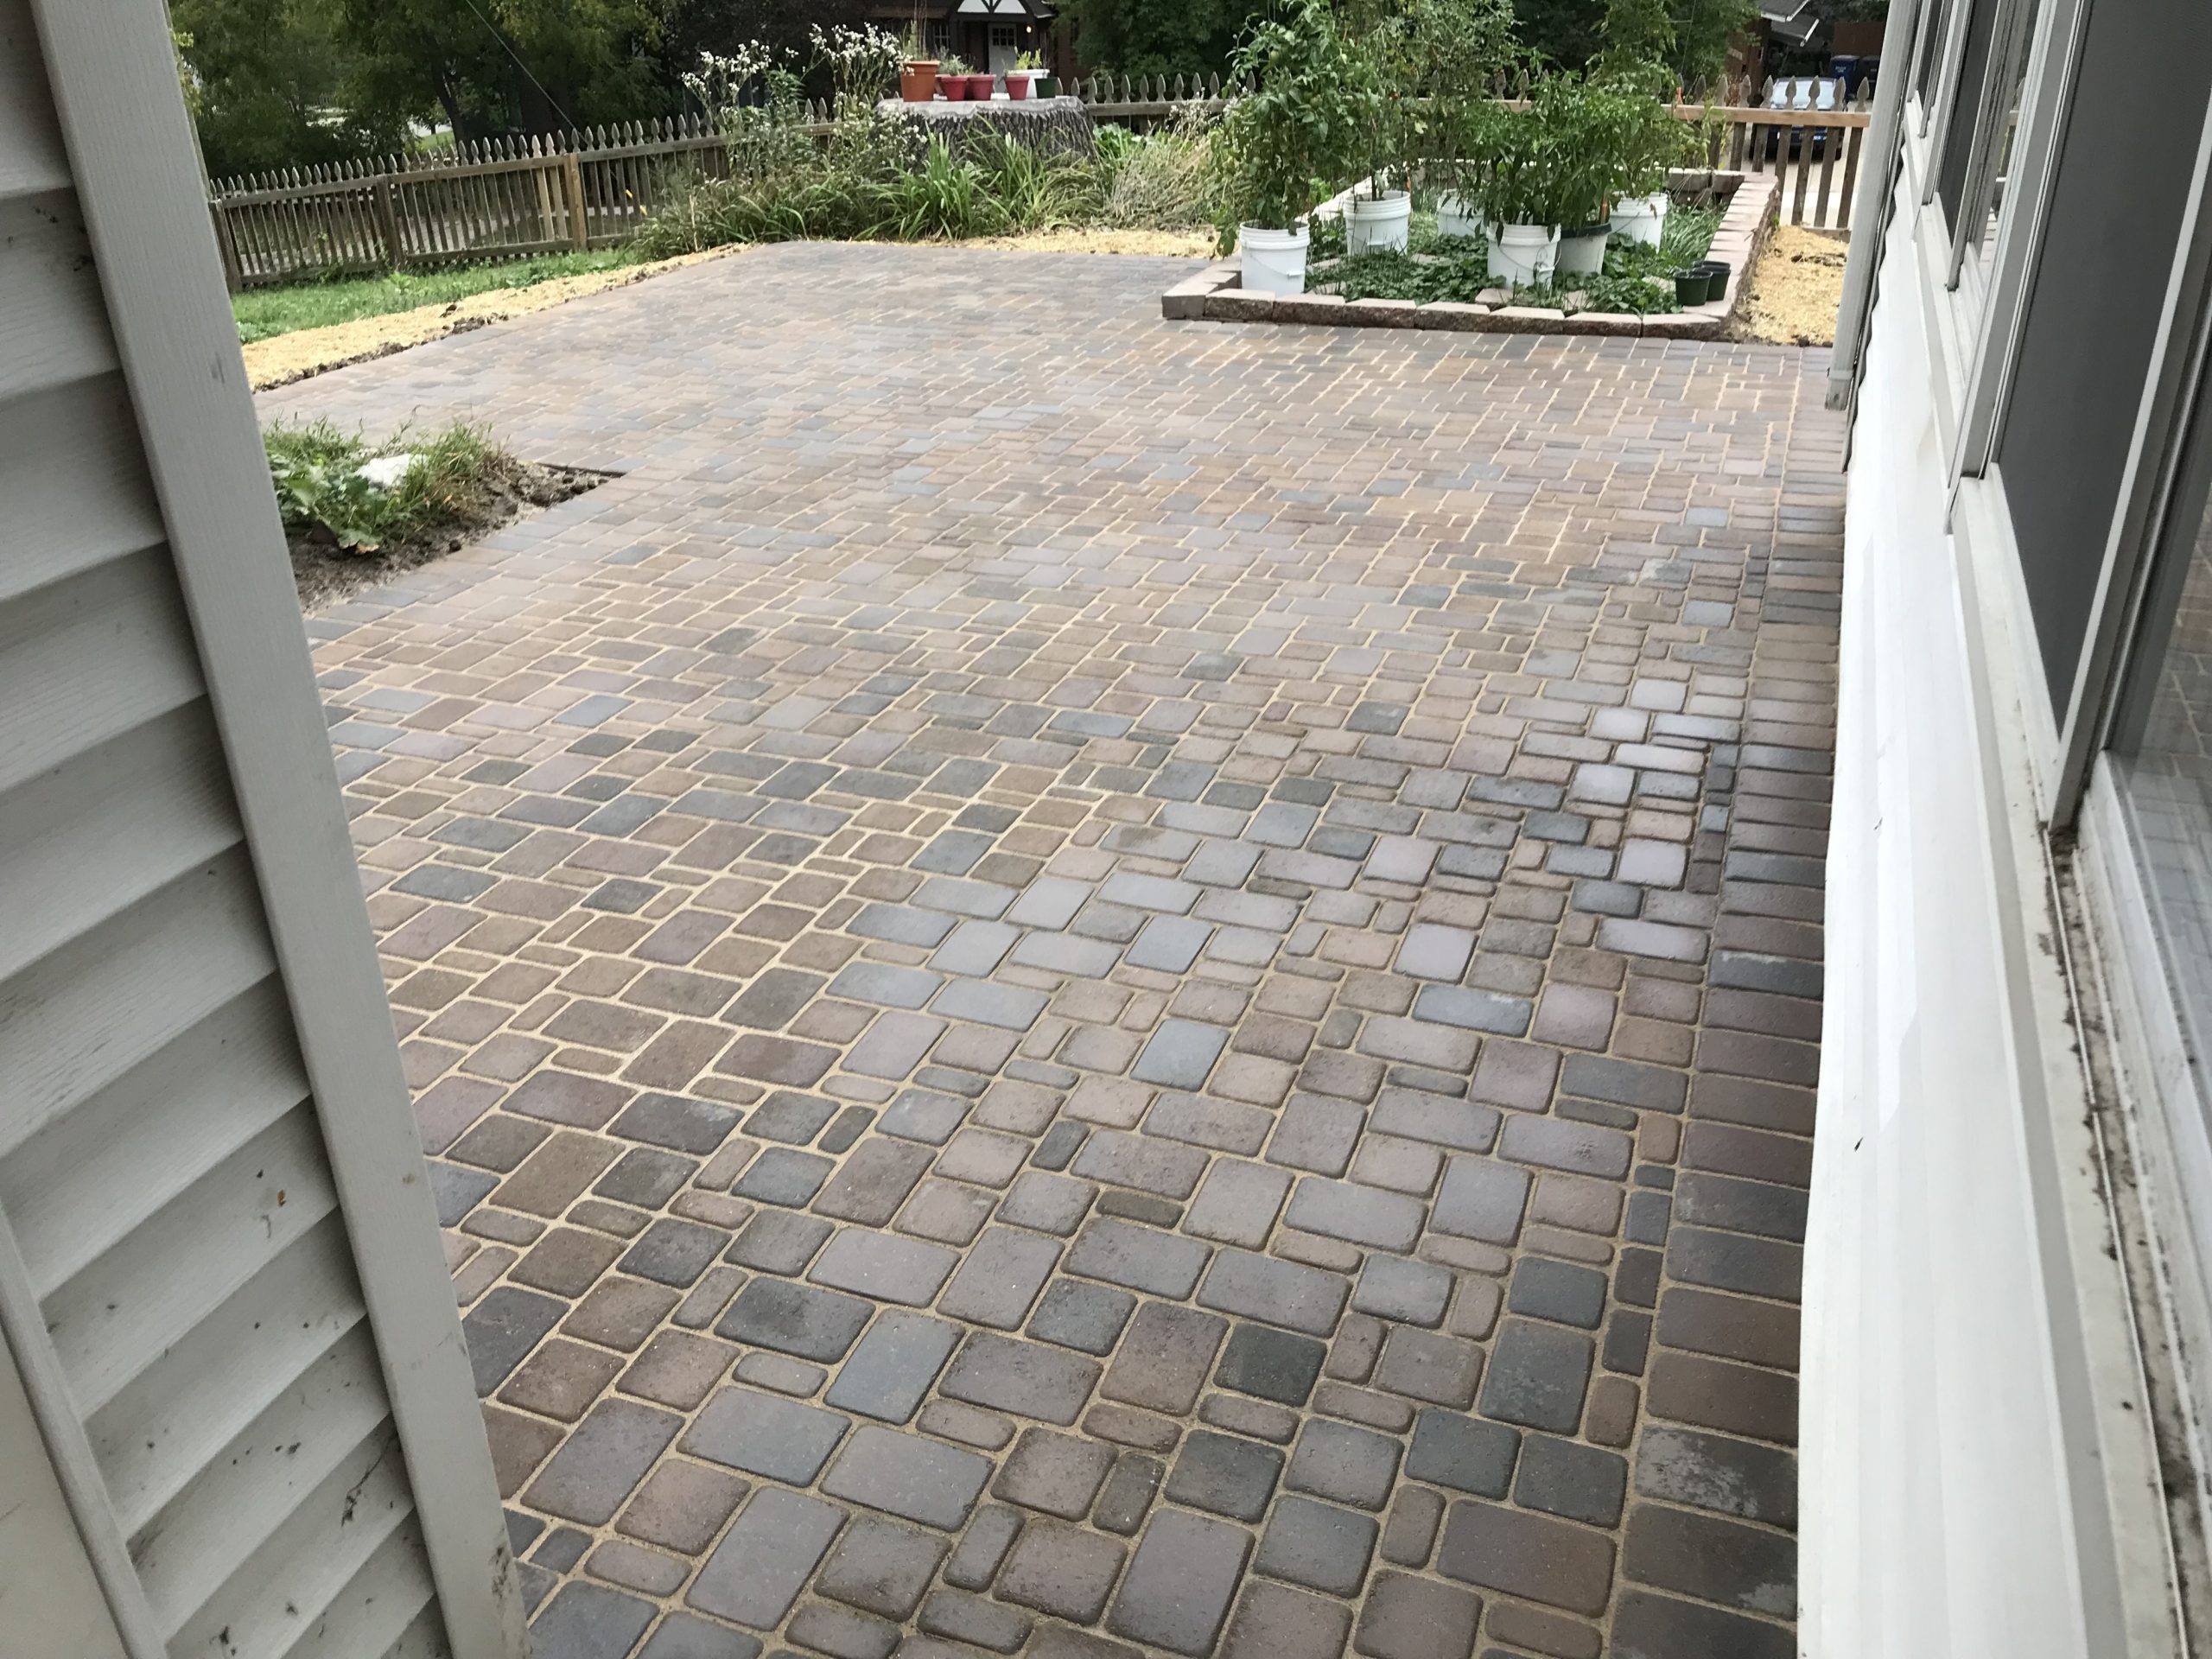 Finished paver patio